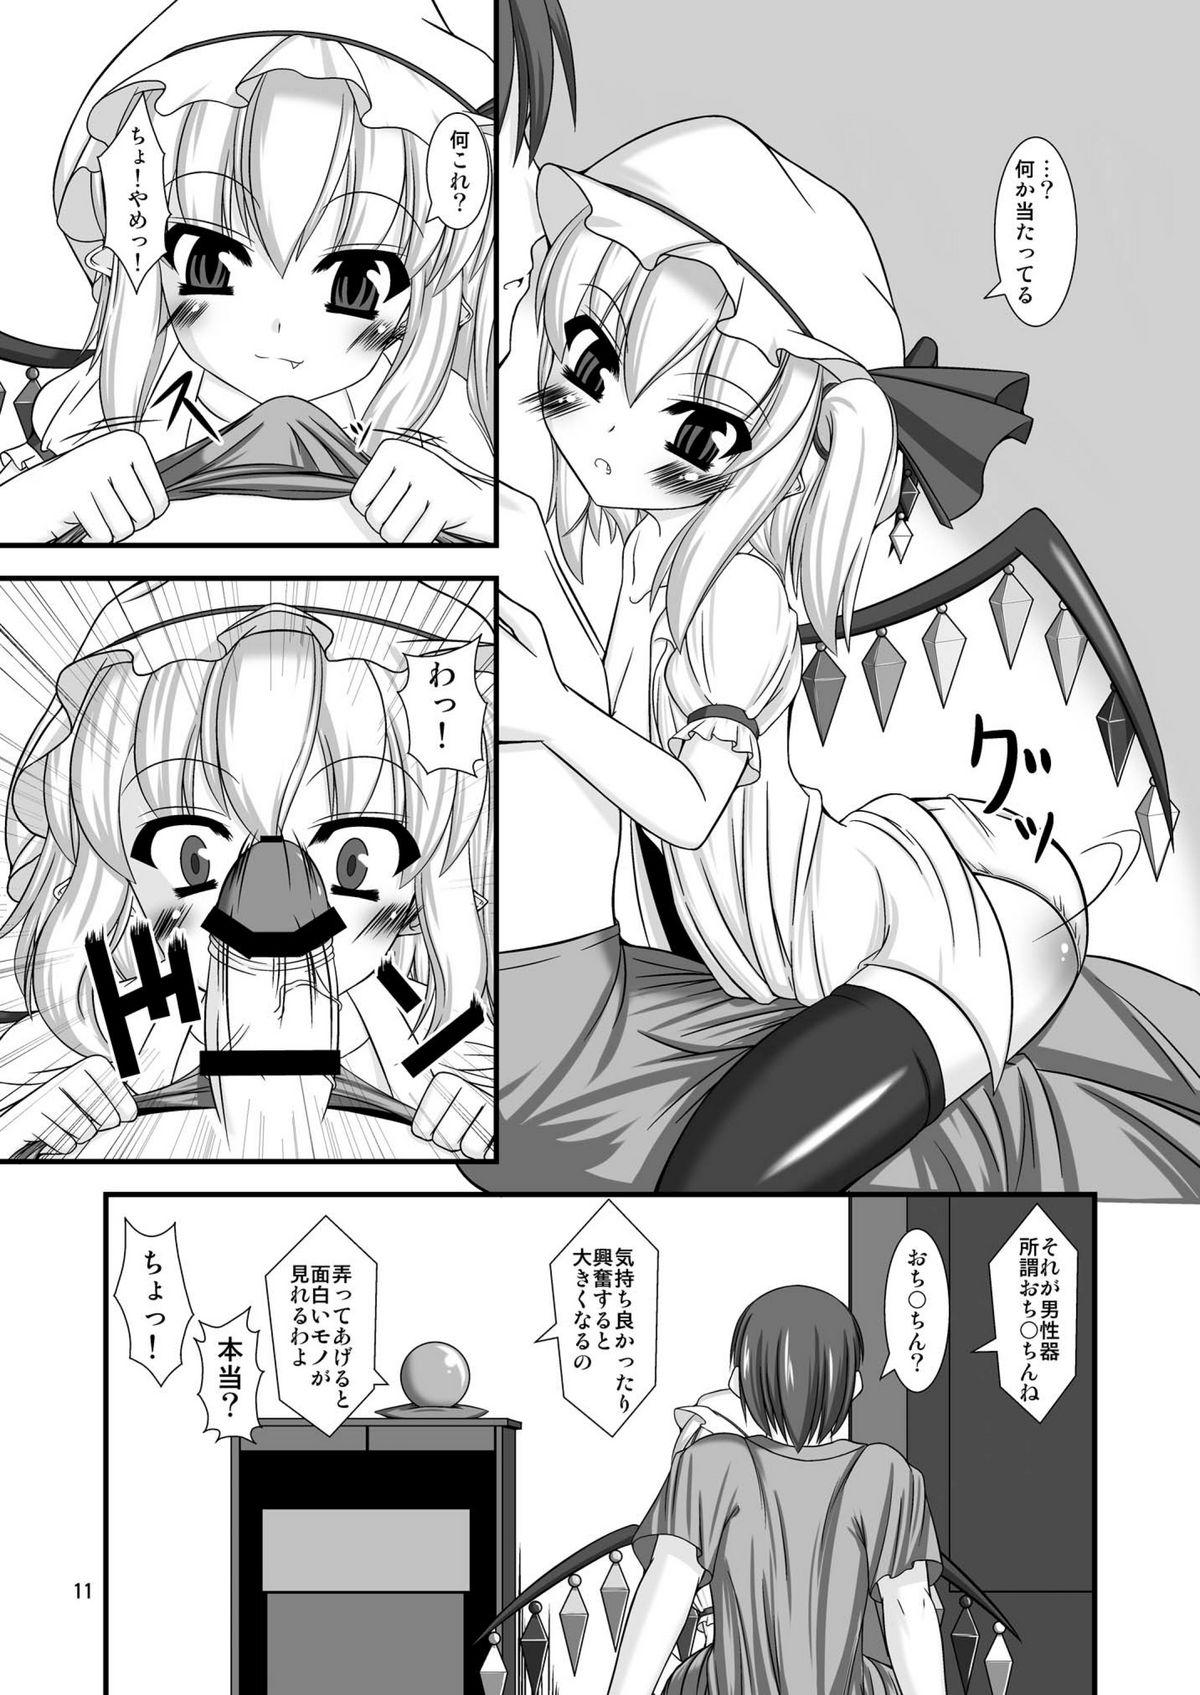 Licking Touhou do-M Hoihoi - Touhou project Youporn - Page 11